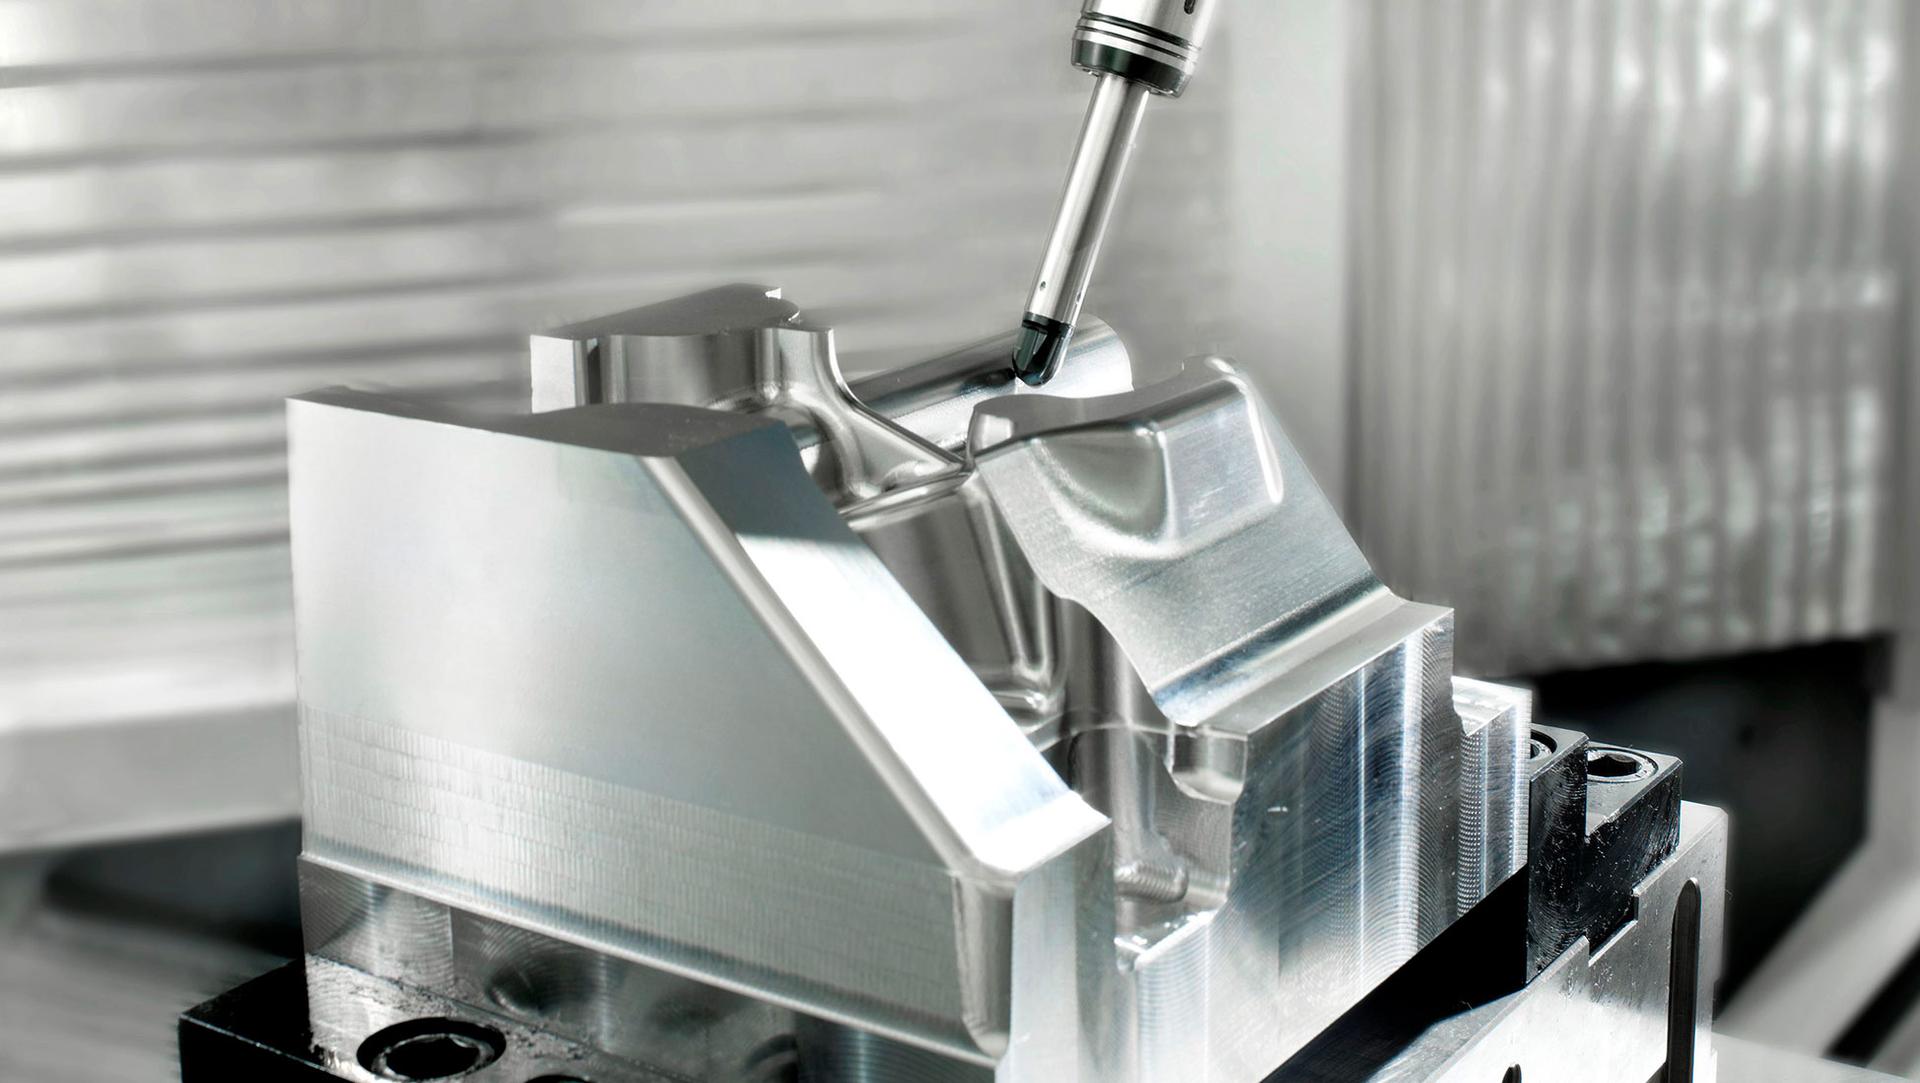 HELLER industry solutions: Tool and mold making